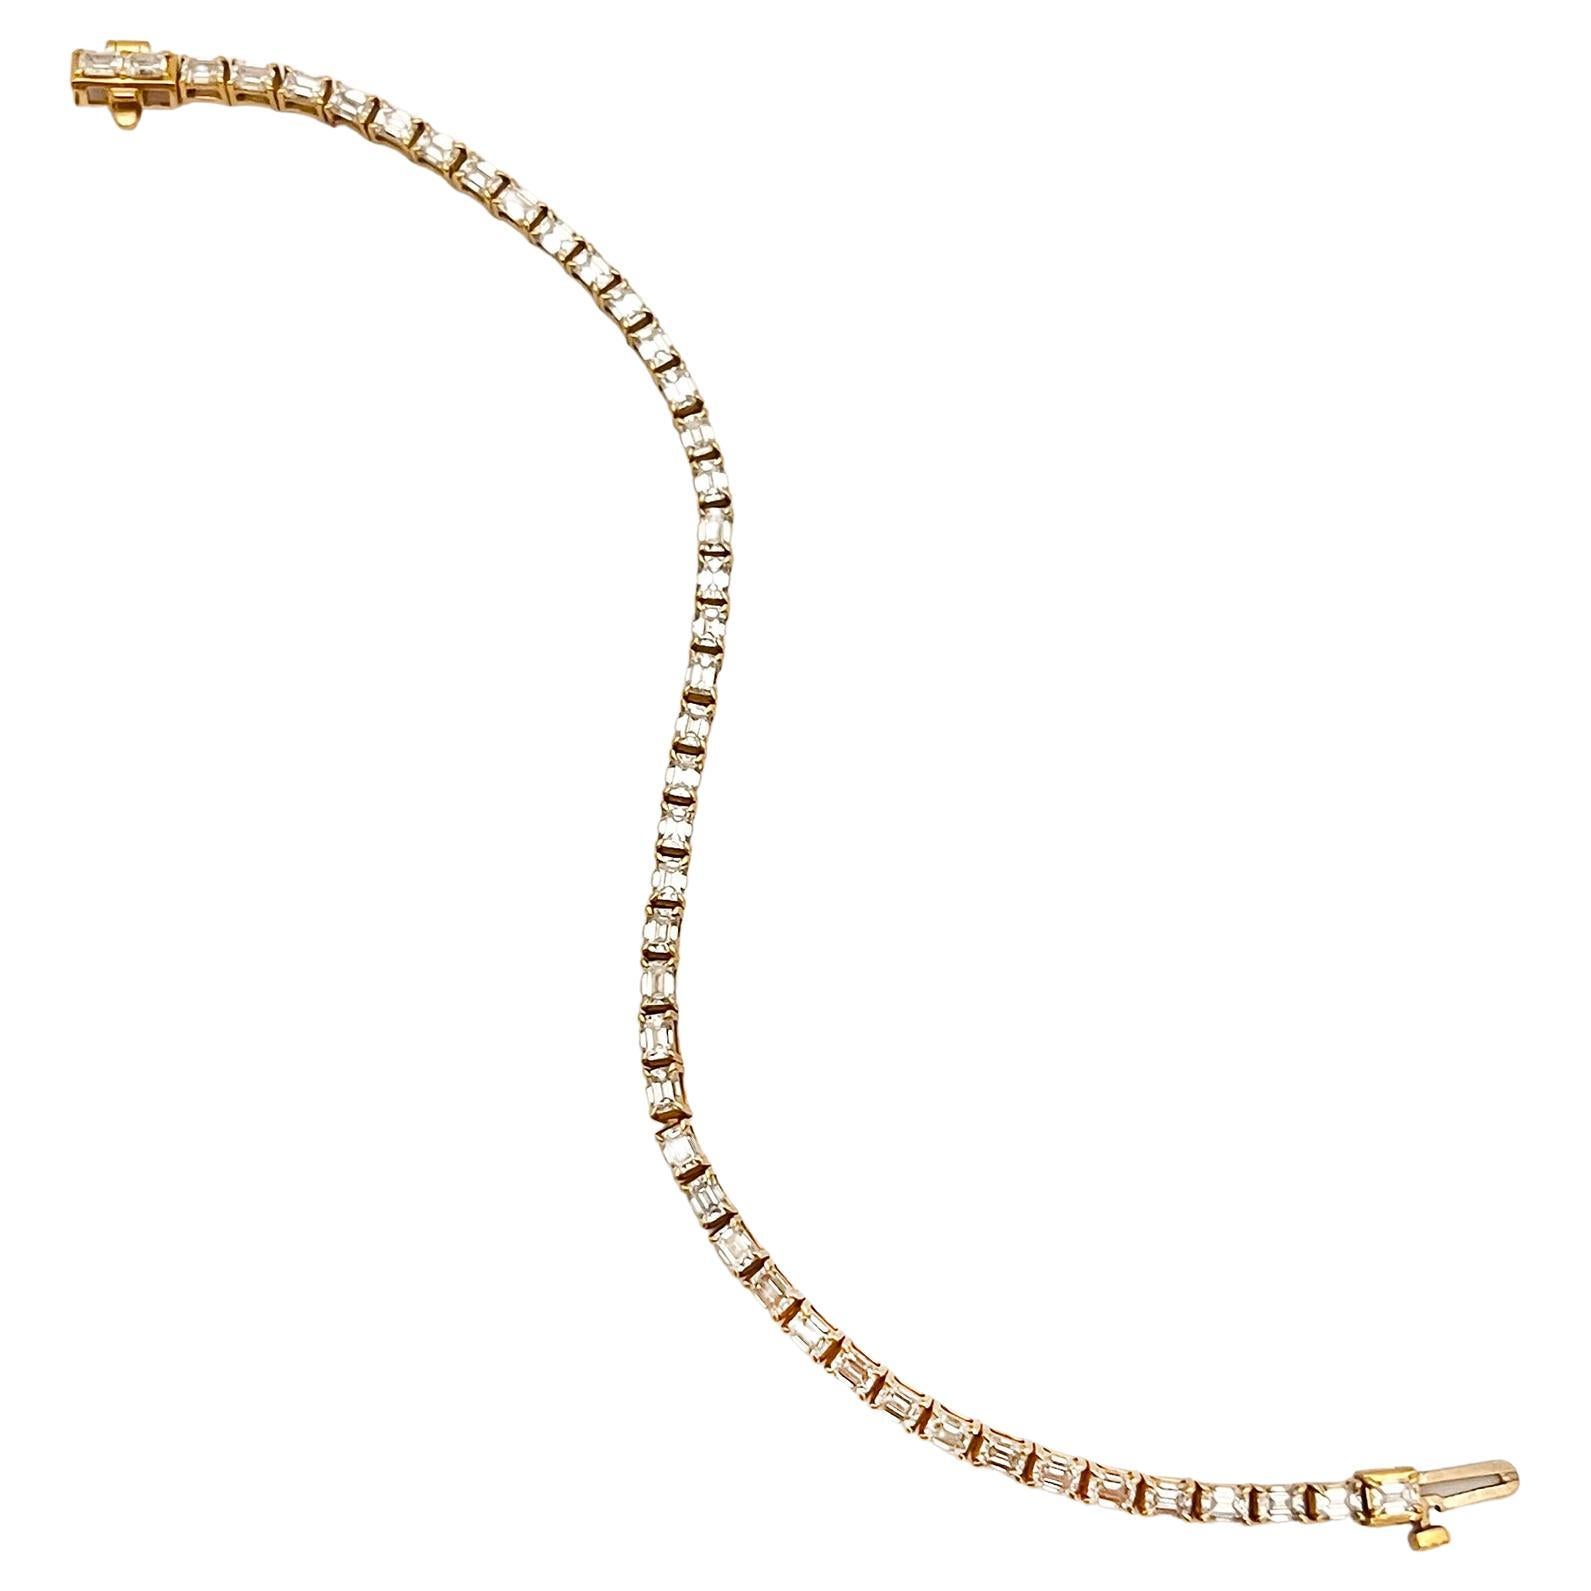 Line bracelet, featuring colorless emerald-cut diamonds set in polished 18k yellow gold.  45 diamonds weighing 4.90 total carats (D-E color, VS1-VS2 clarity).  6.5